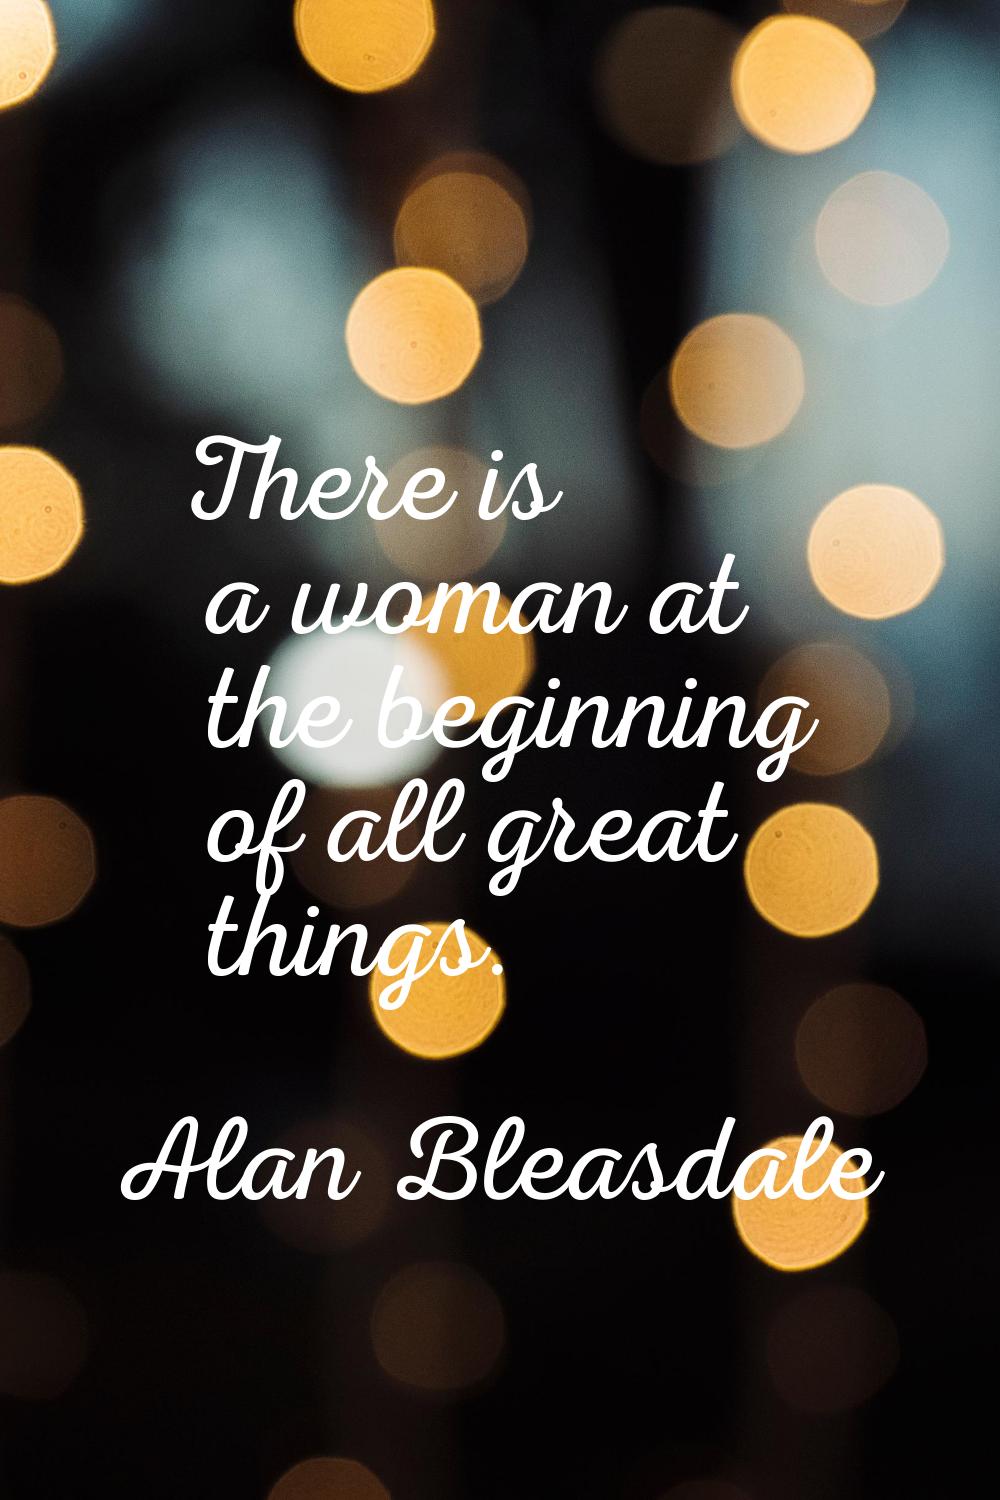 There is a woman at the beginning of all great things.